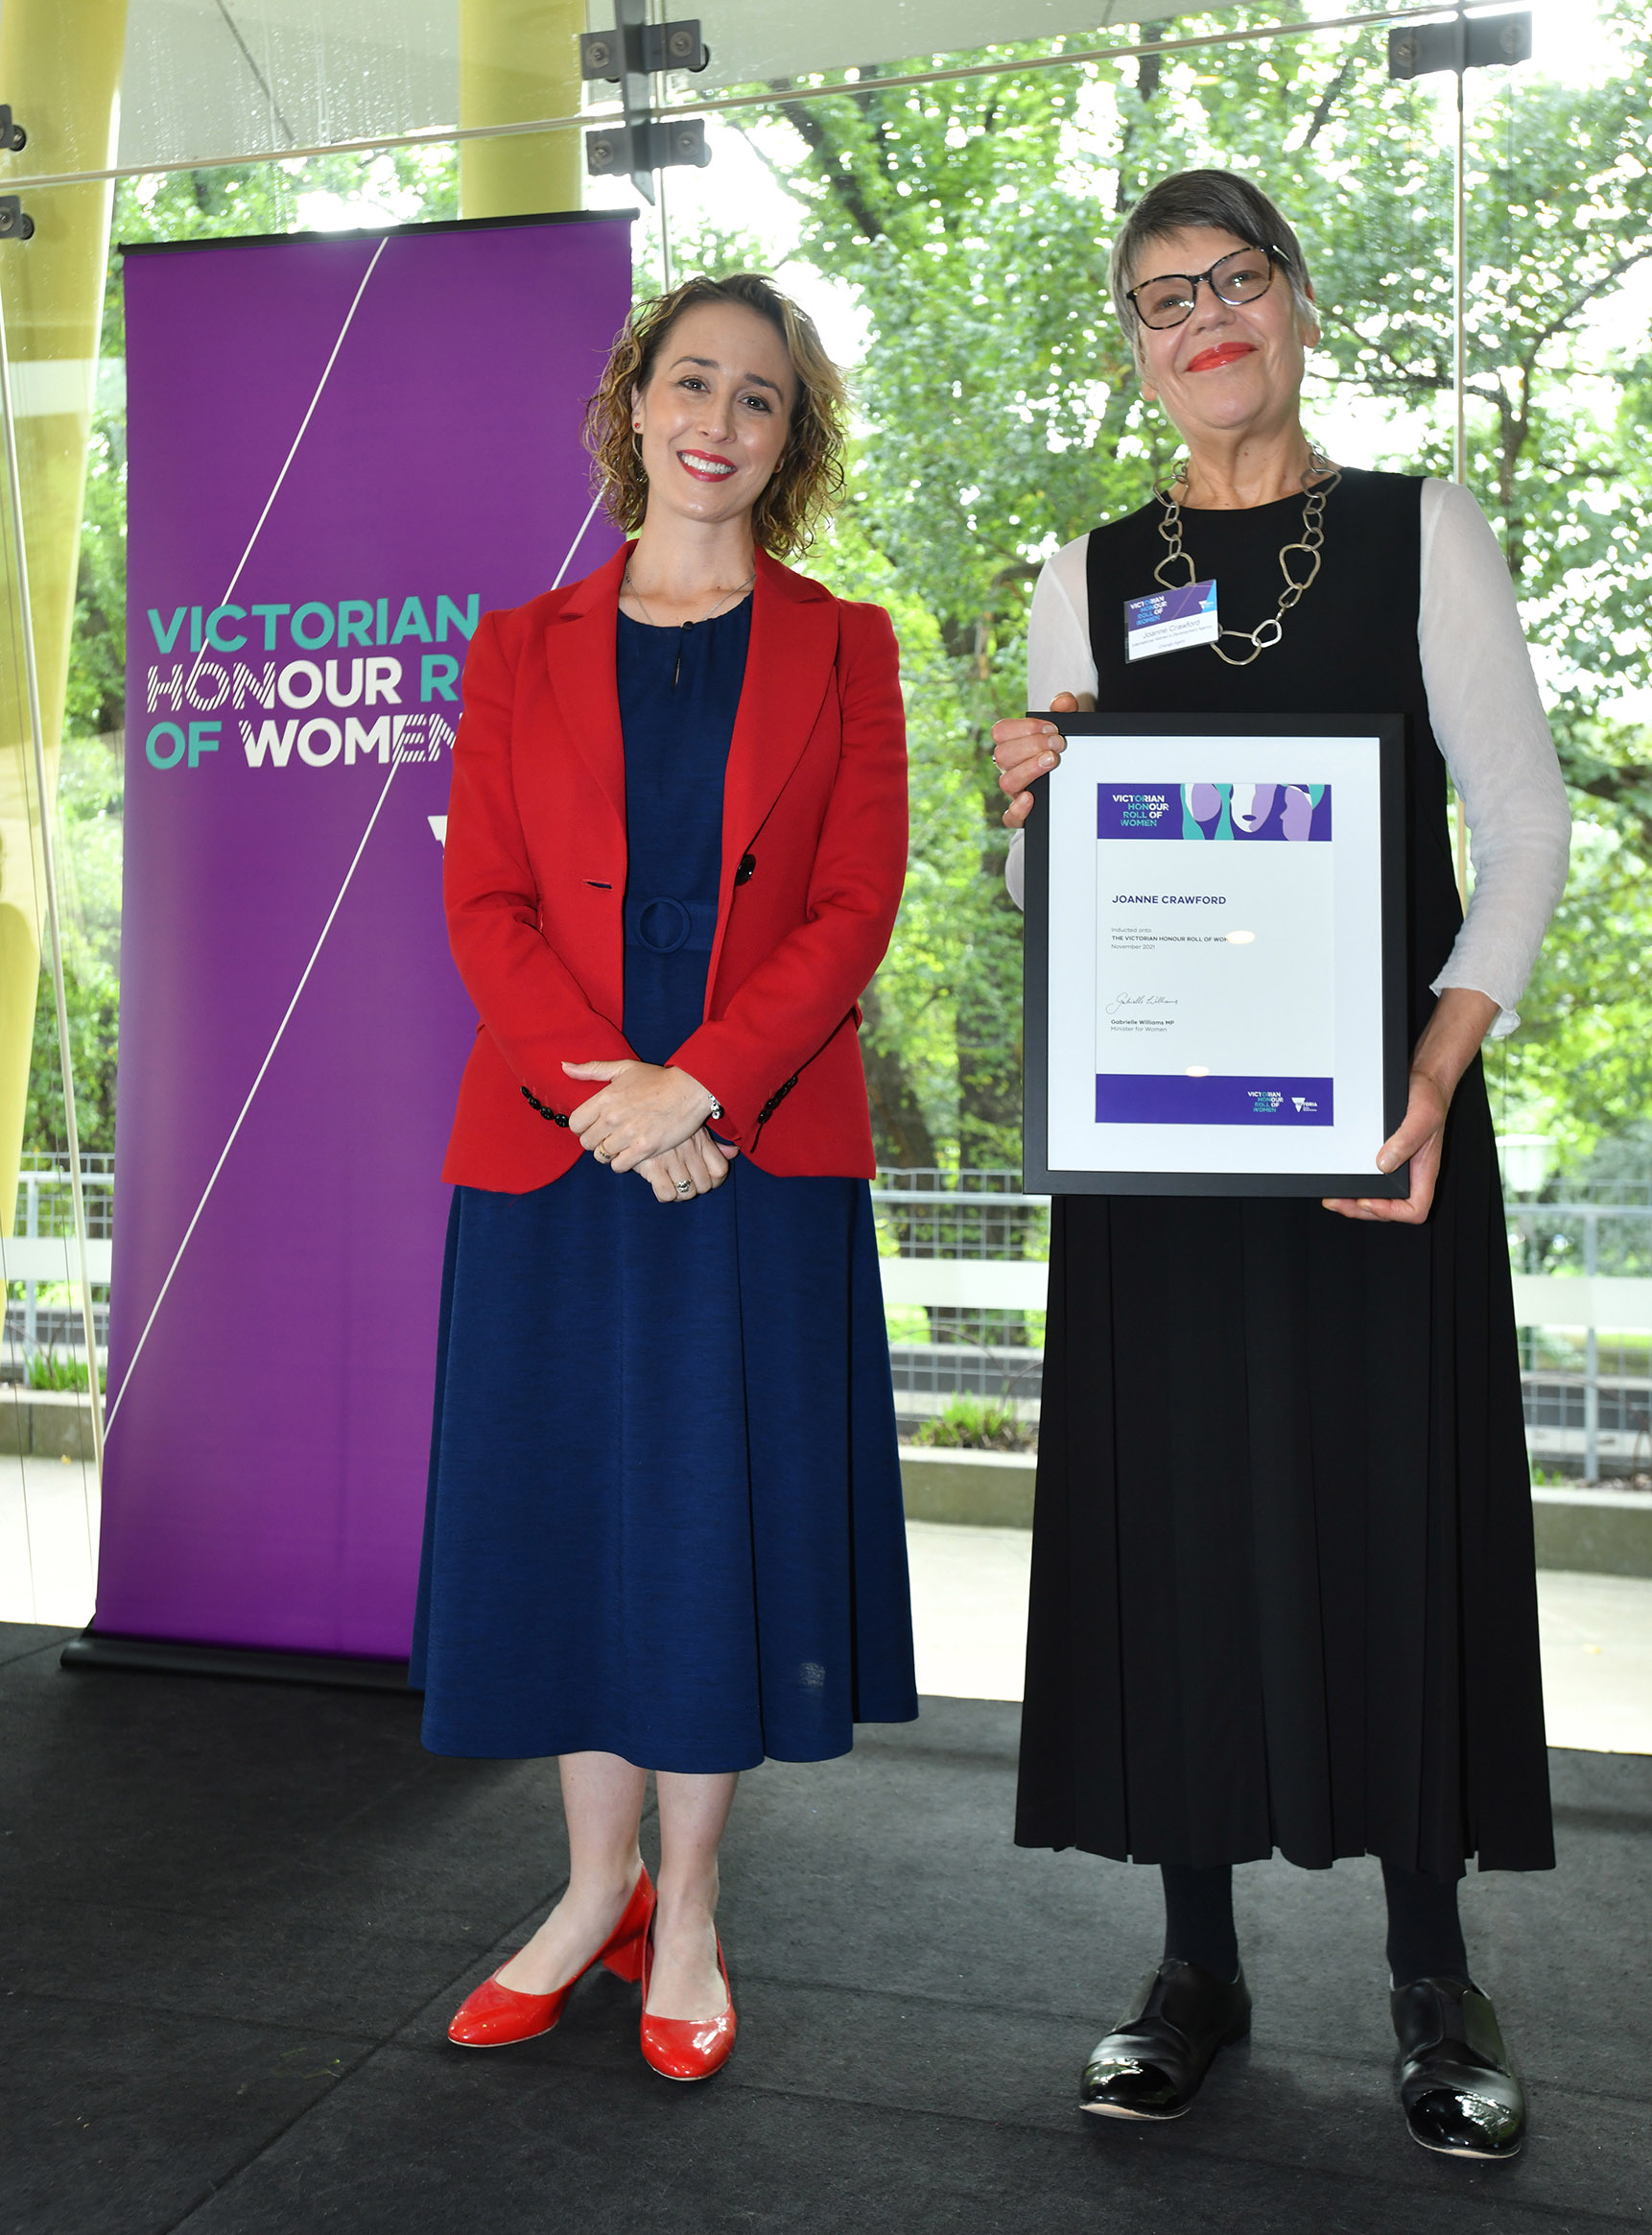 Jo a white woman wearing a long black dress is holding up an award. She is standing next to Gabrielle Williams, the Victorian Minister for Women. Gabrielle is a white woman wearing a navy dress and a red blazer.